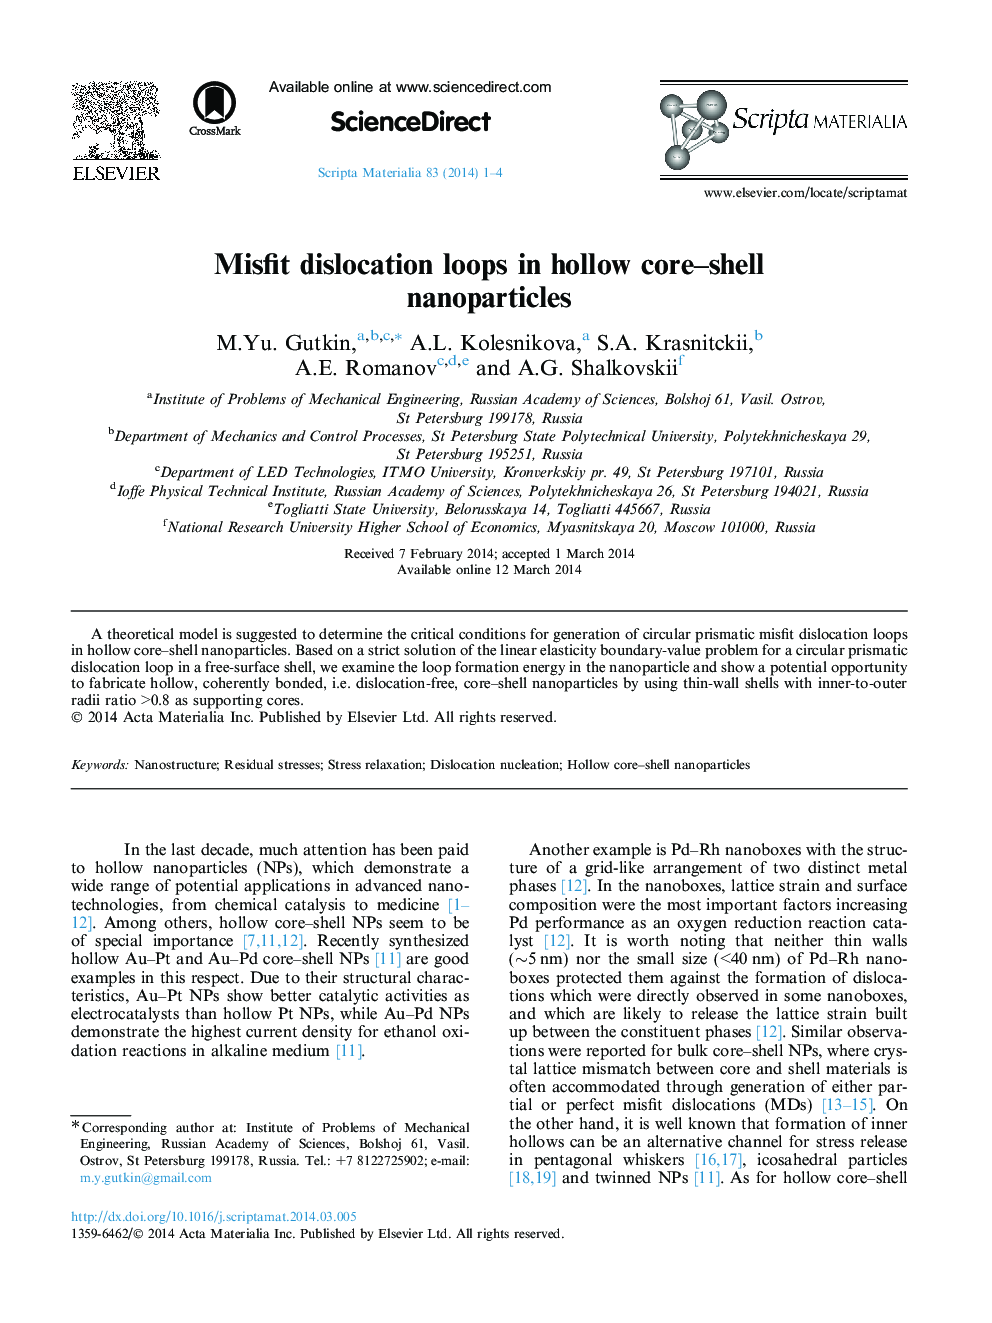 Misfit dislocation loops in hollow core–shell nanoparticles